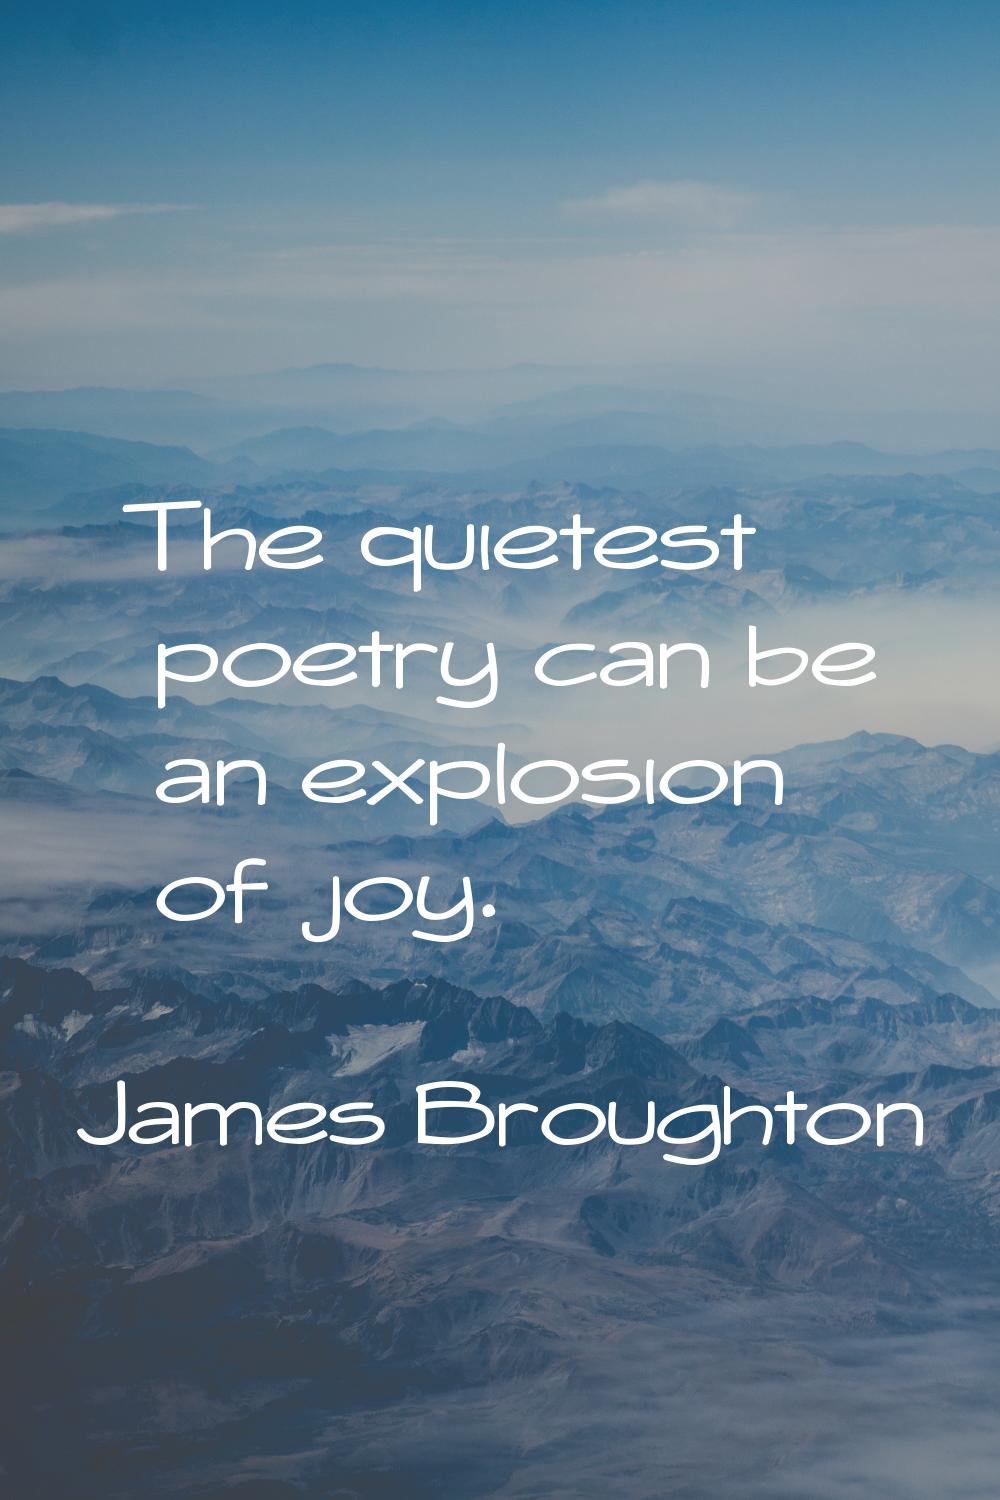 The quietest poetry can be an explosion of joy.